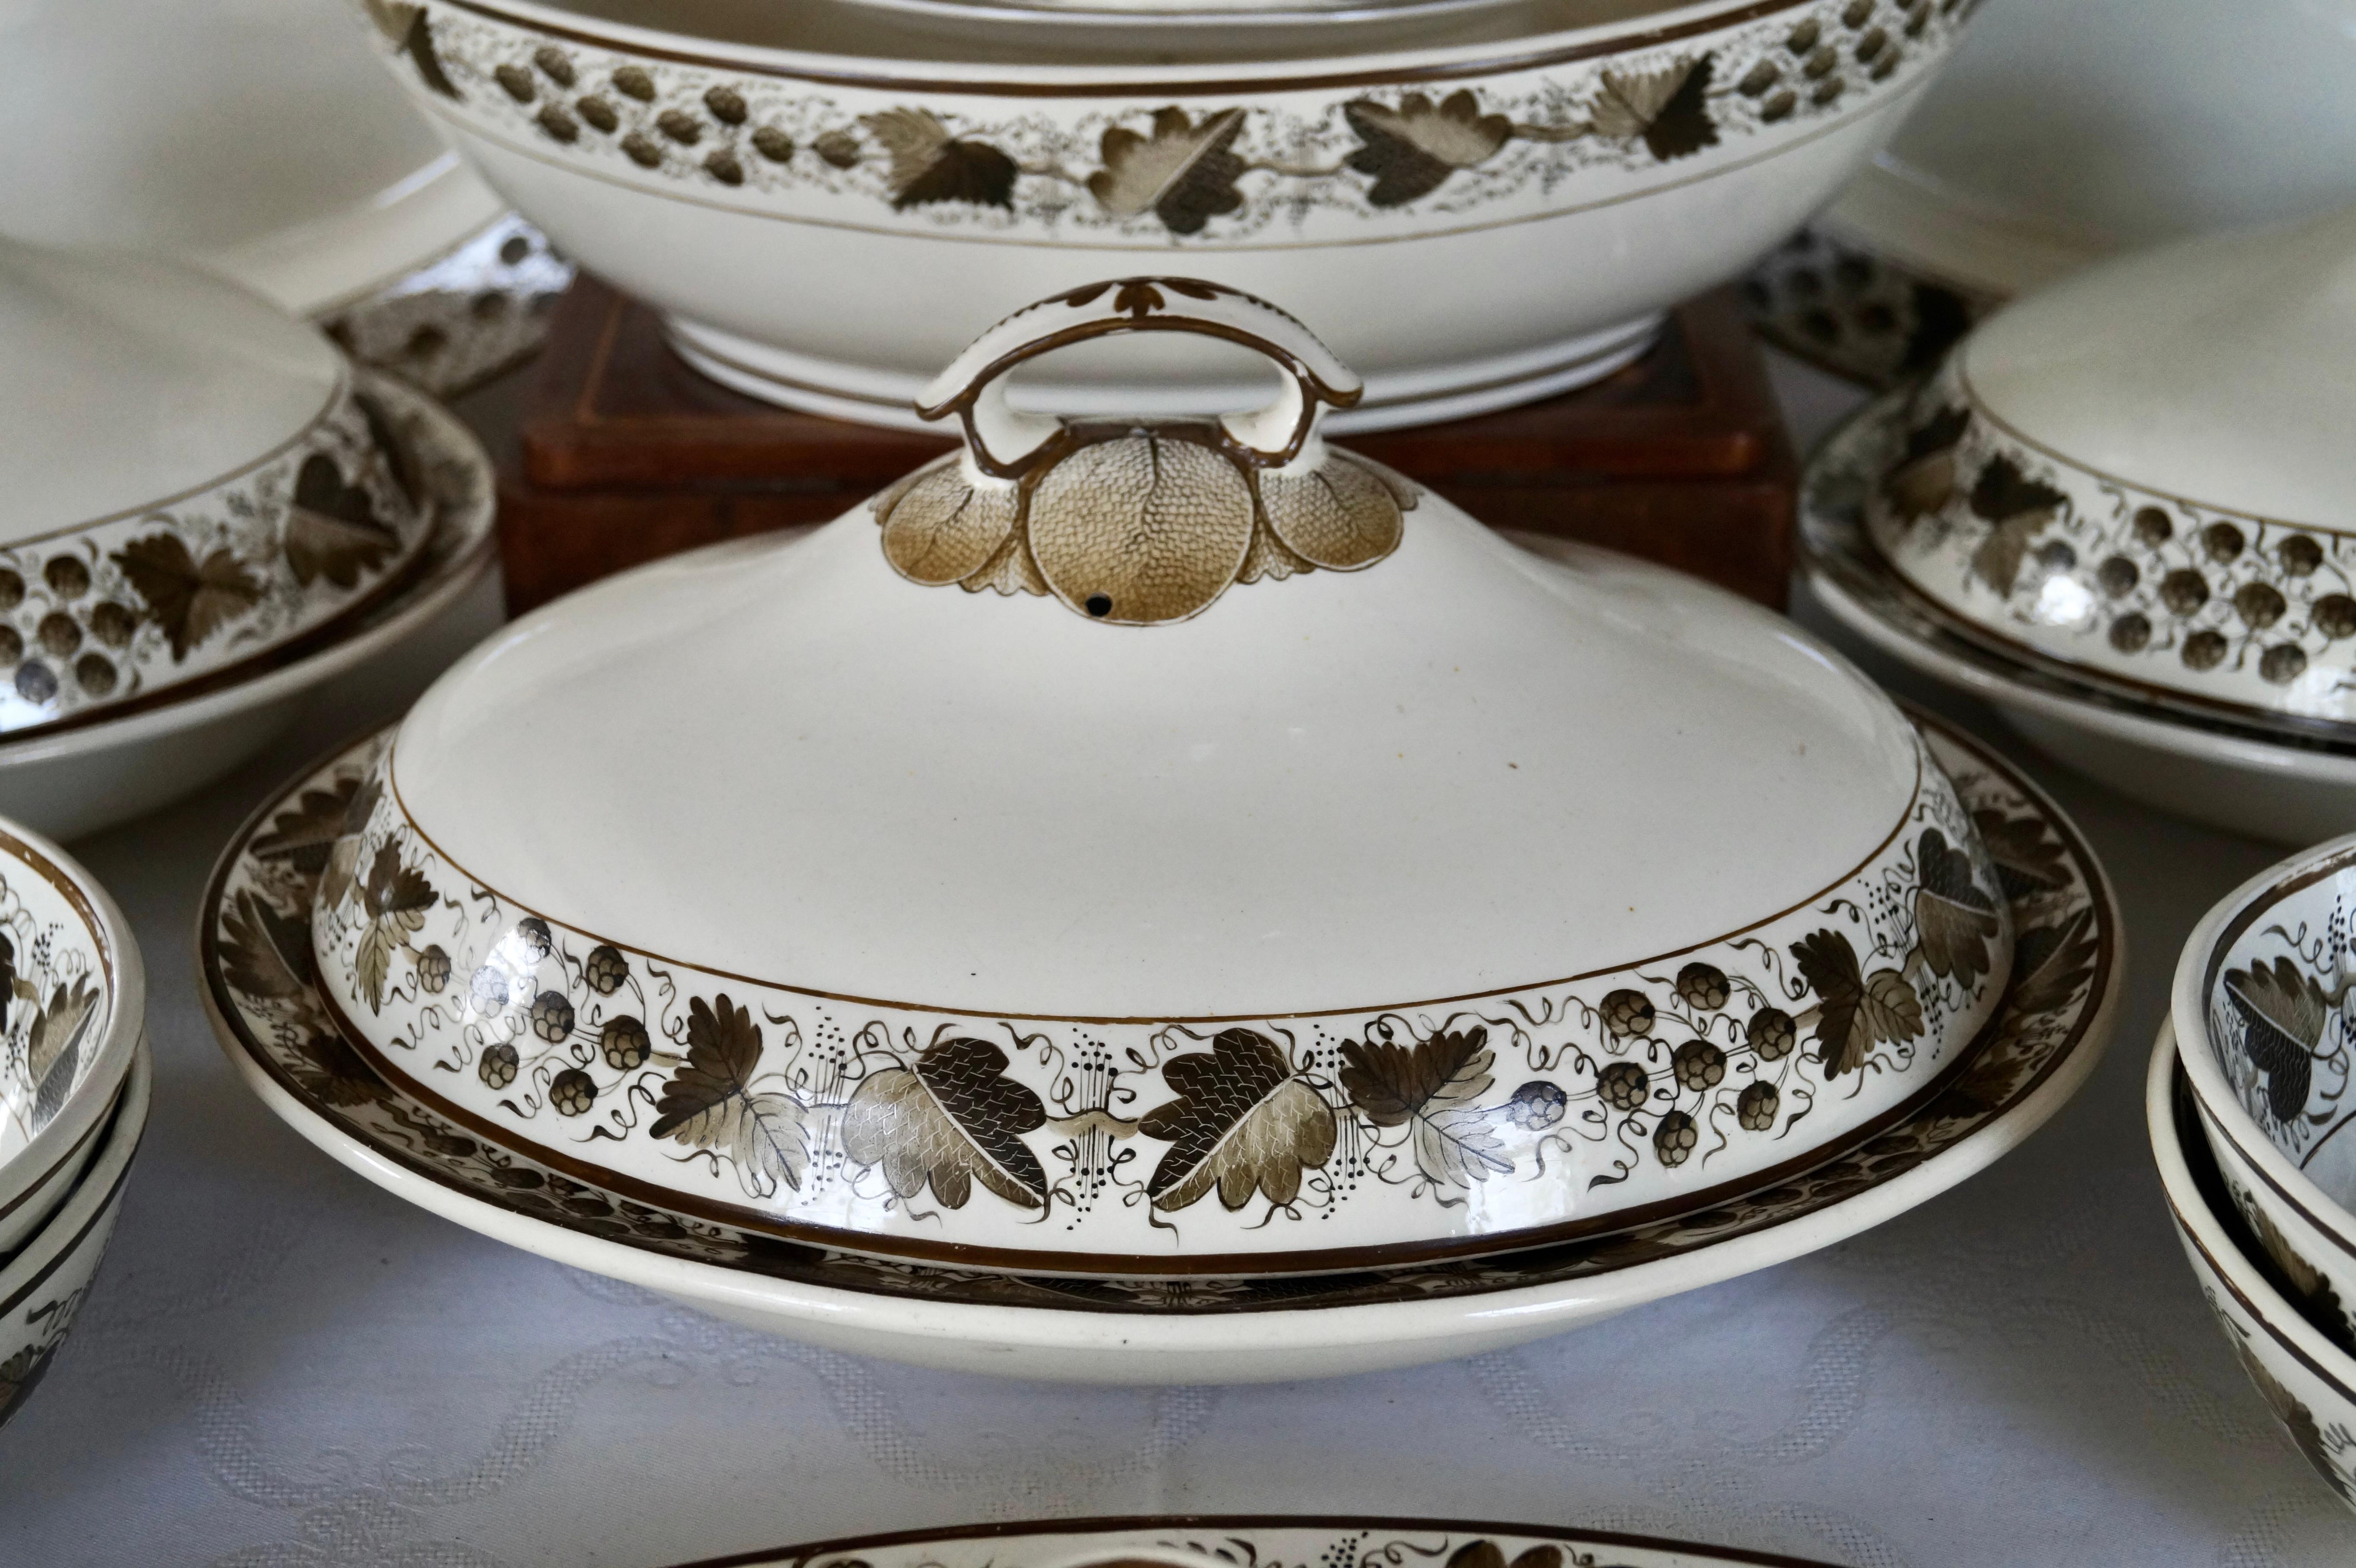 Beautiful rare extensive antique Copeland Spode creamware tableware parts ca 1800s

The border outside and inside are Handpainted decorated with oak leaves and walnut, chestnuts decoration in the color brown. The pattern number is